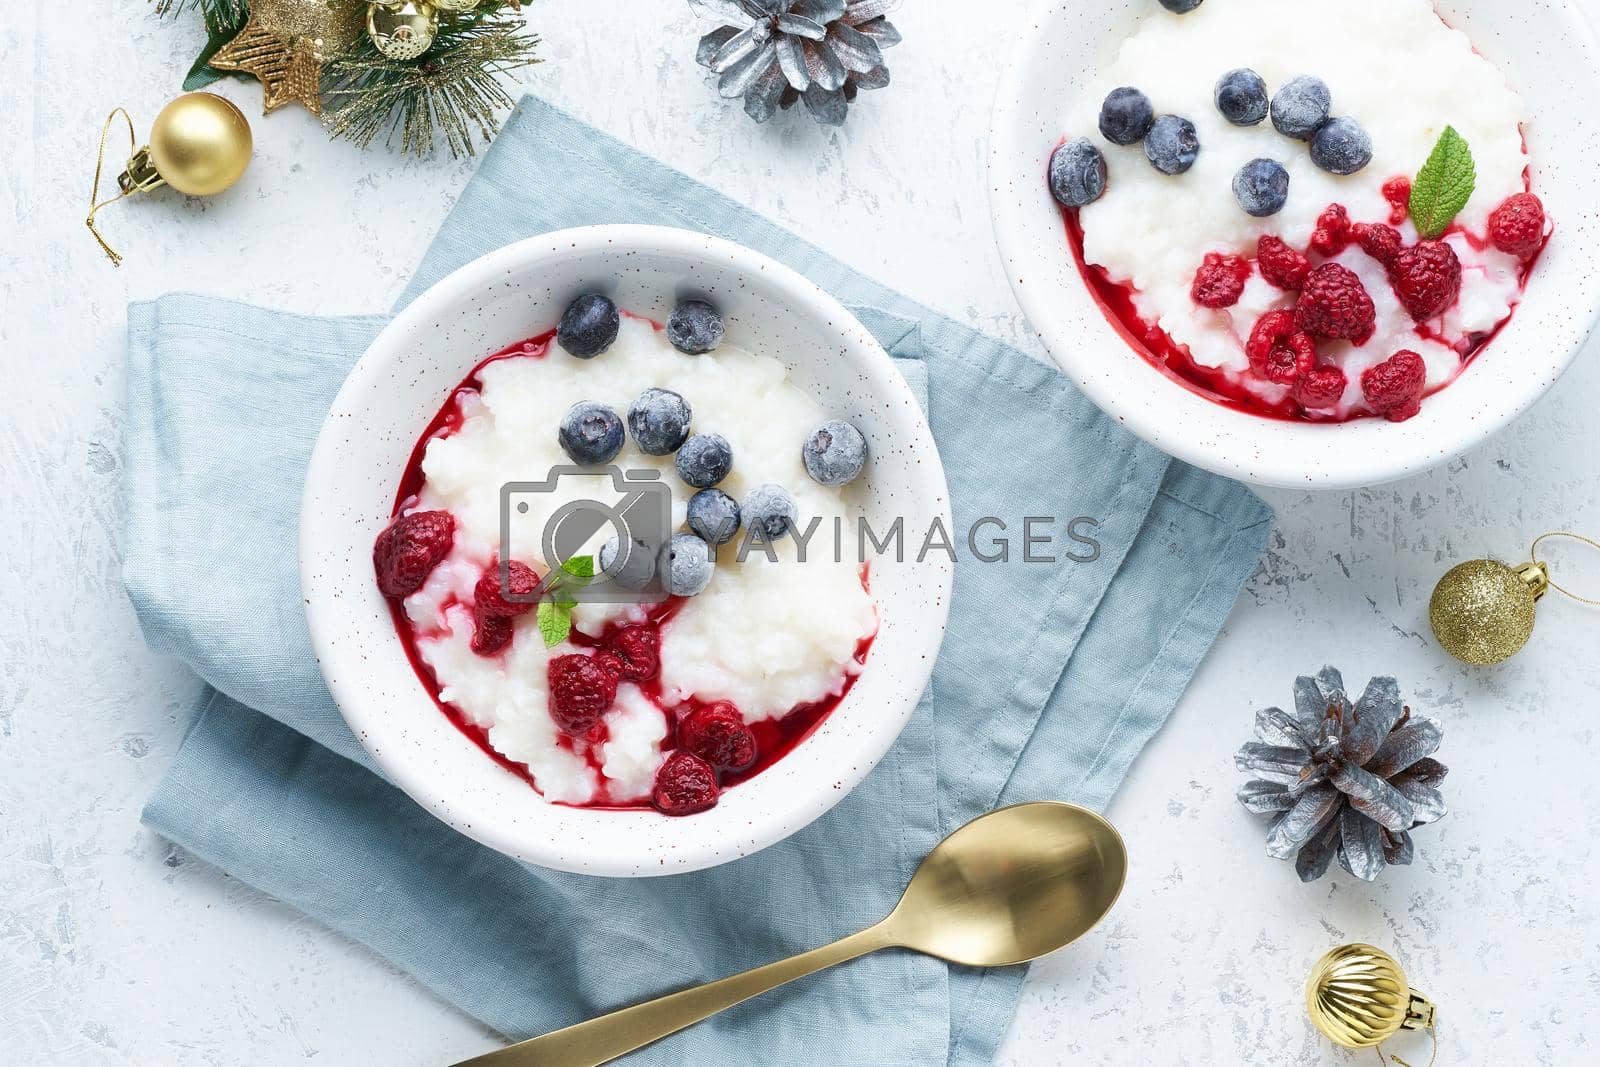 Royalty free image of Christmas food, rice pudding, top view. Healthy Vegan diet breakfast with coconut milk by NataBene